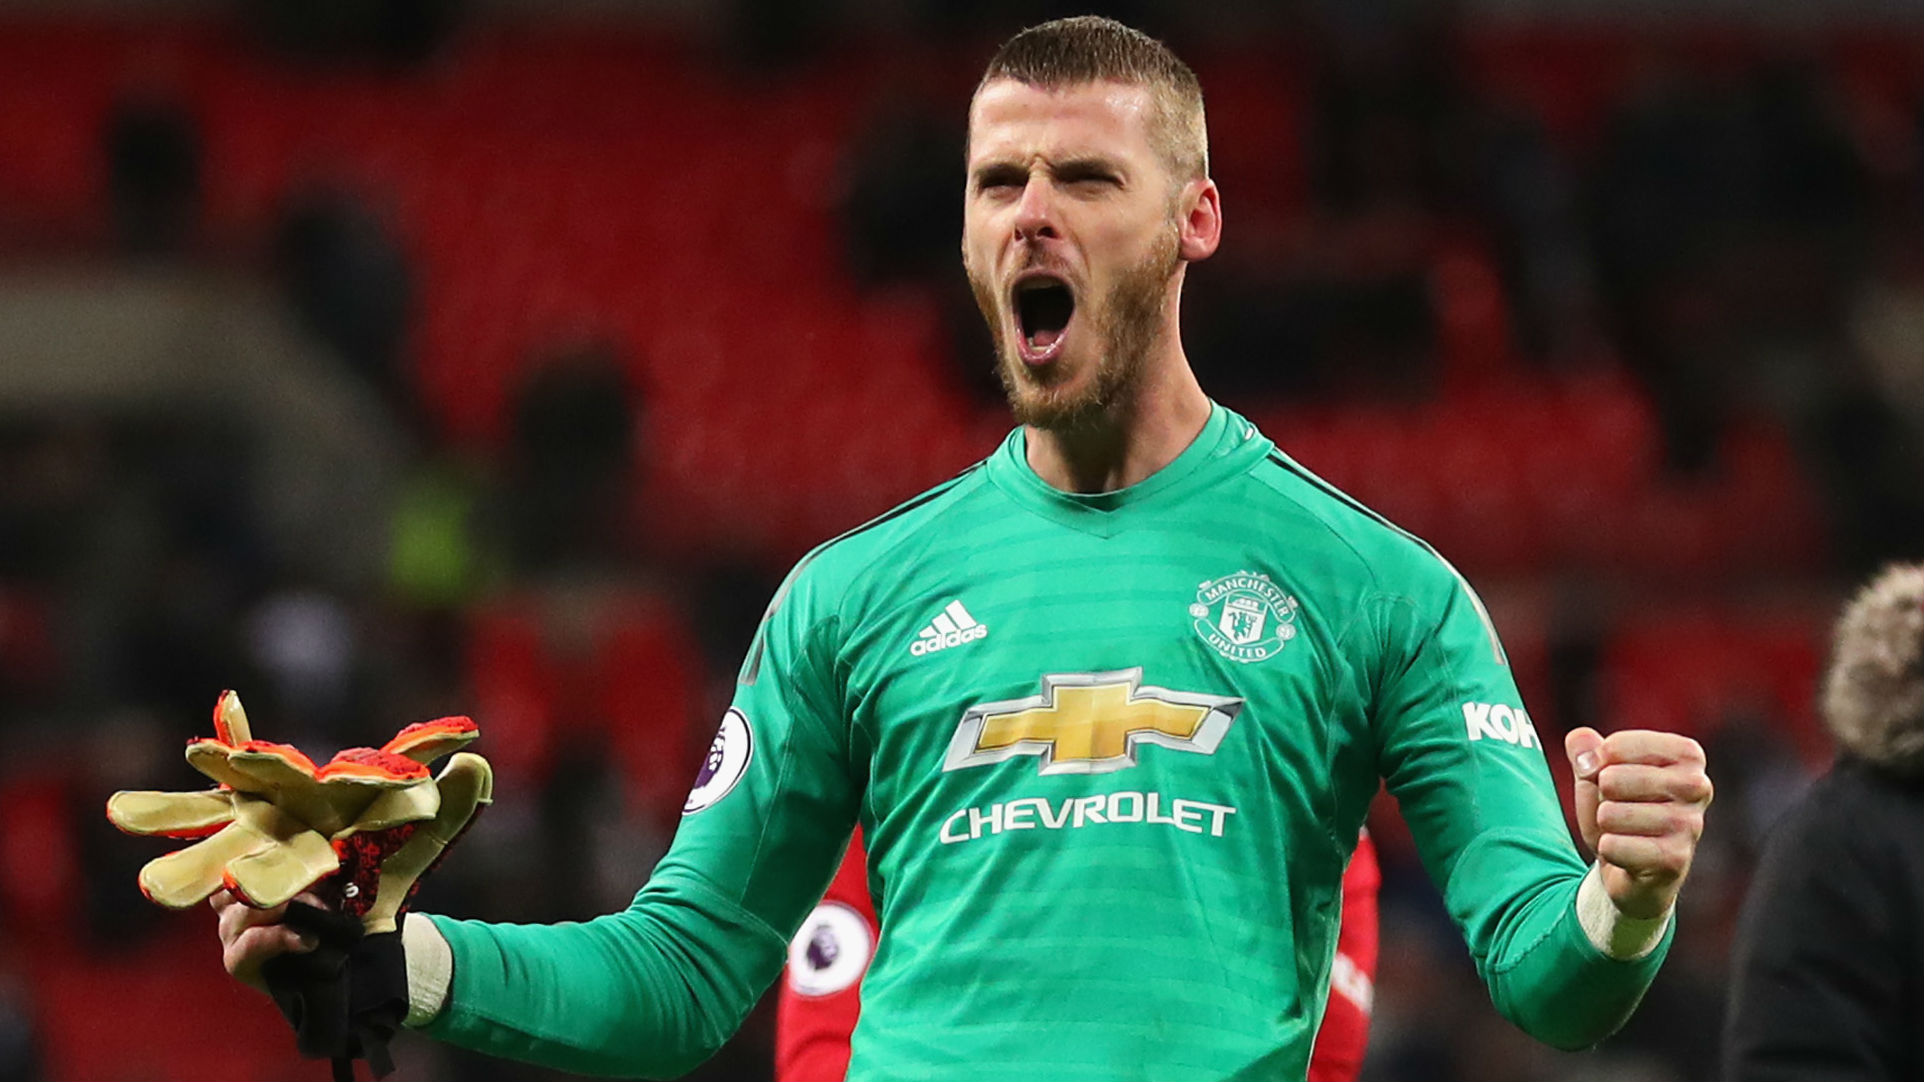 Spanish club Real Betis is interested in signing the 32-year-old former Manchester United goalkeeper.